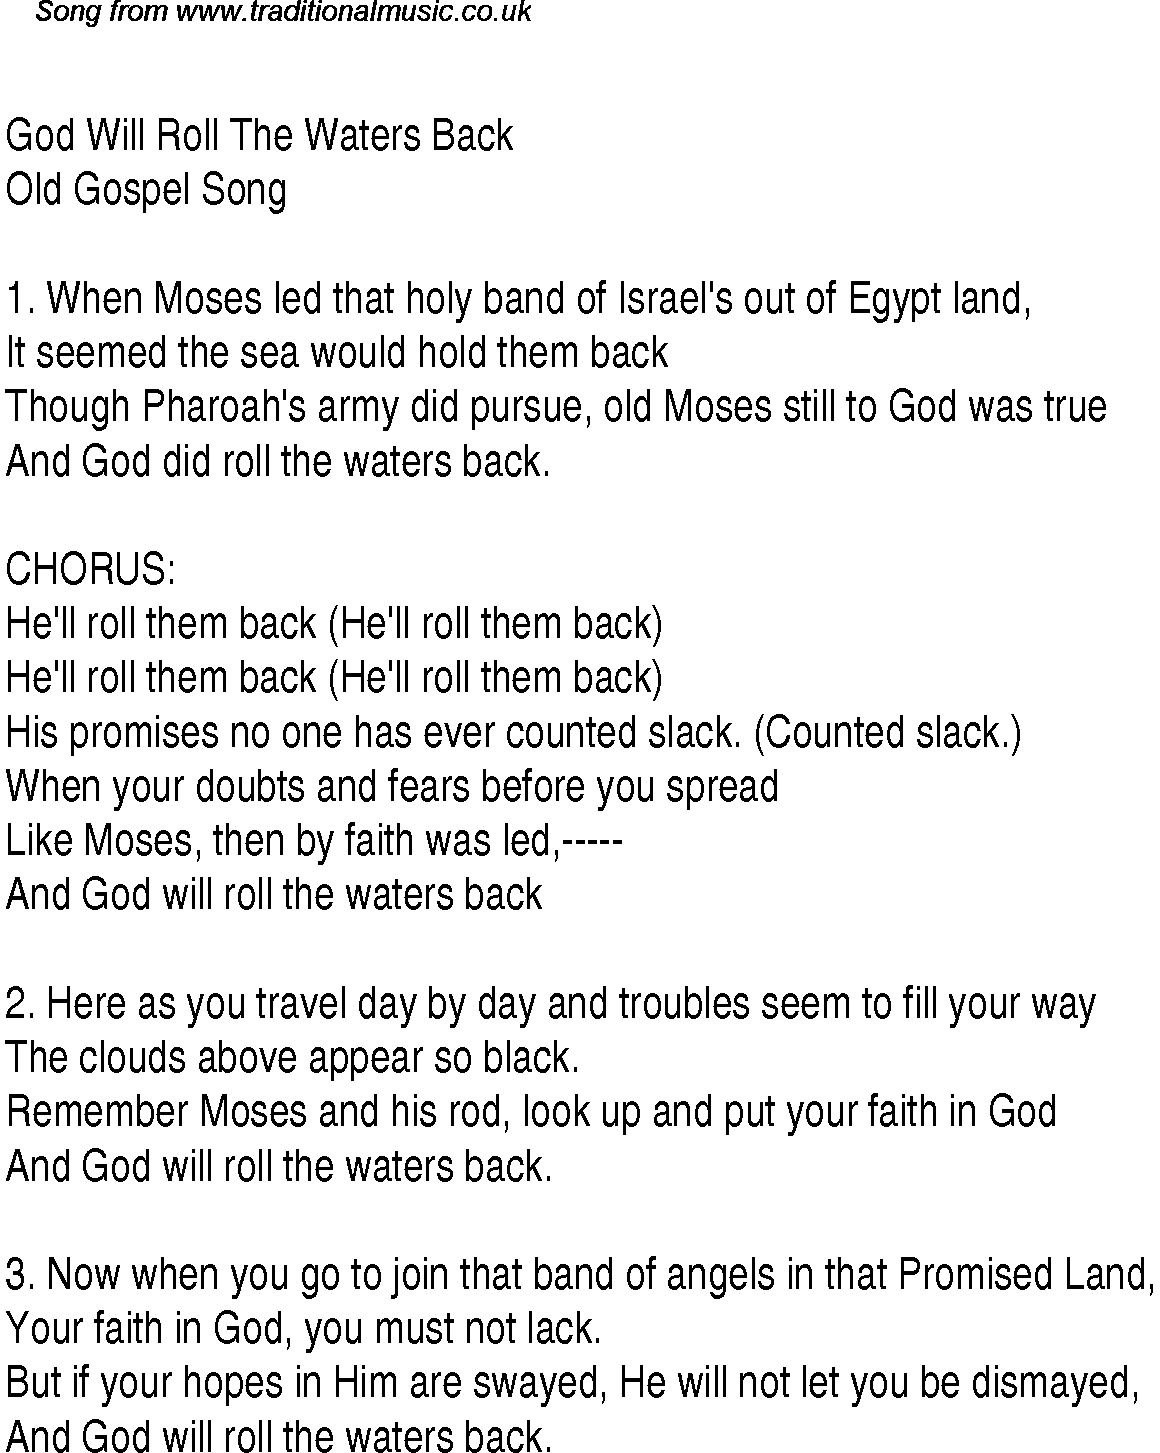 Gospel Song: god-will-roll-the-waters-back, lyrics and chords.